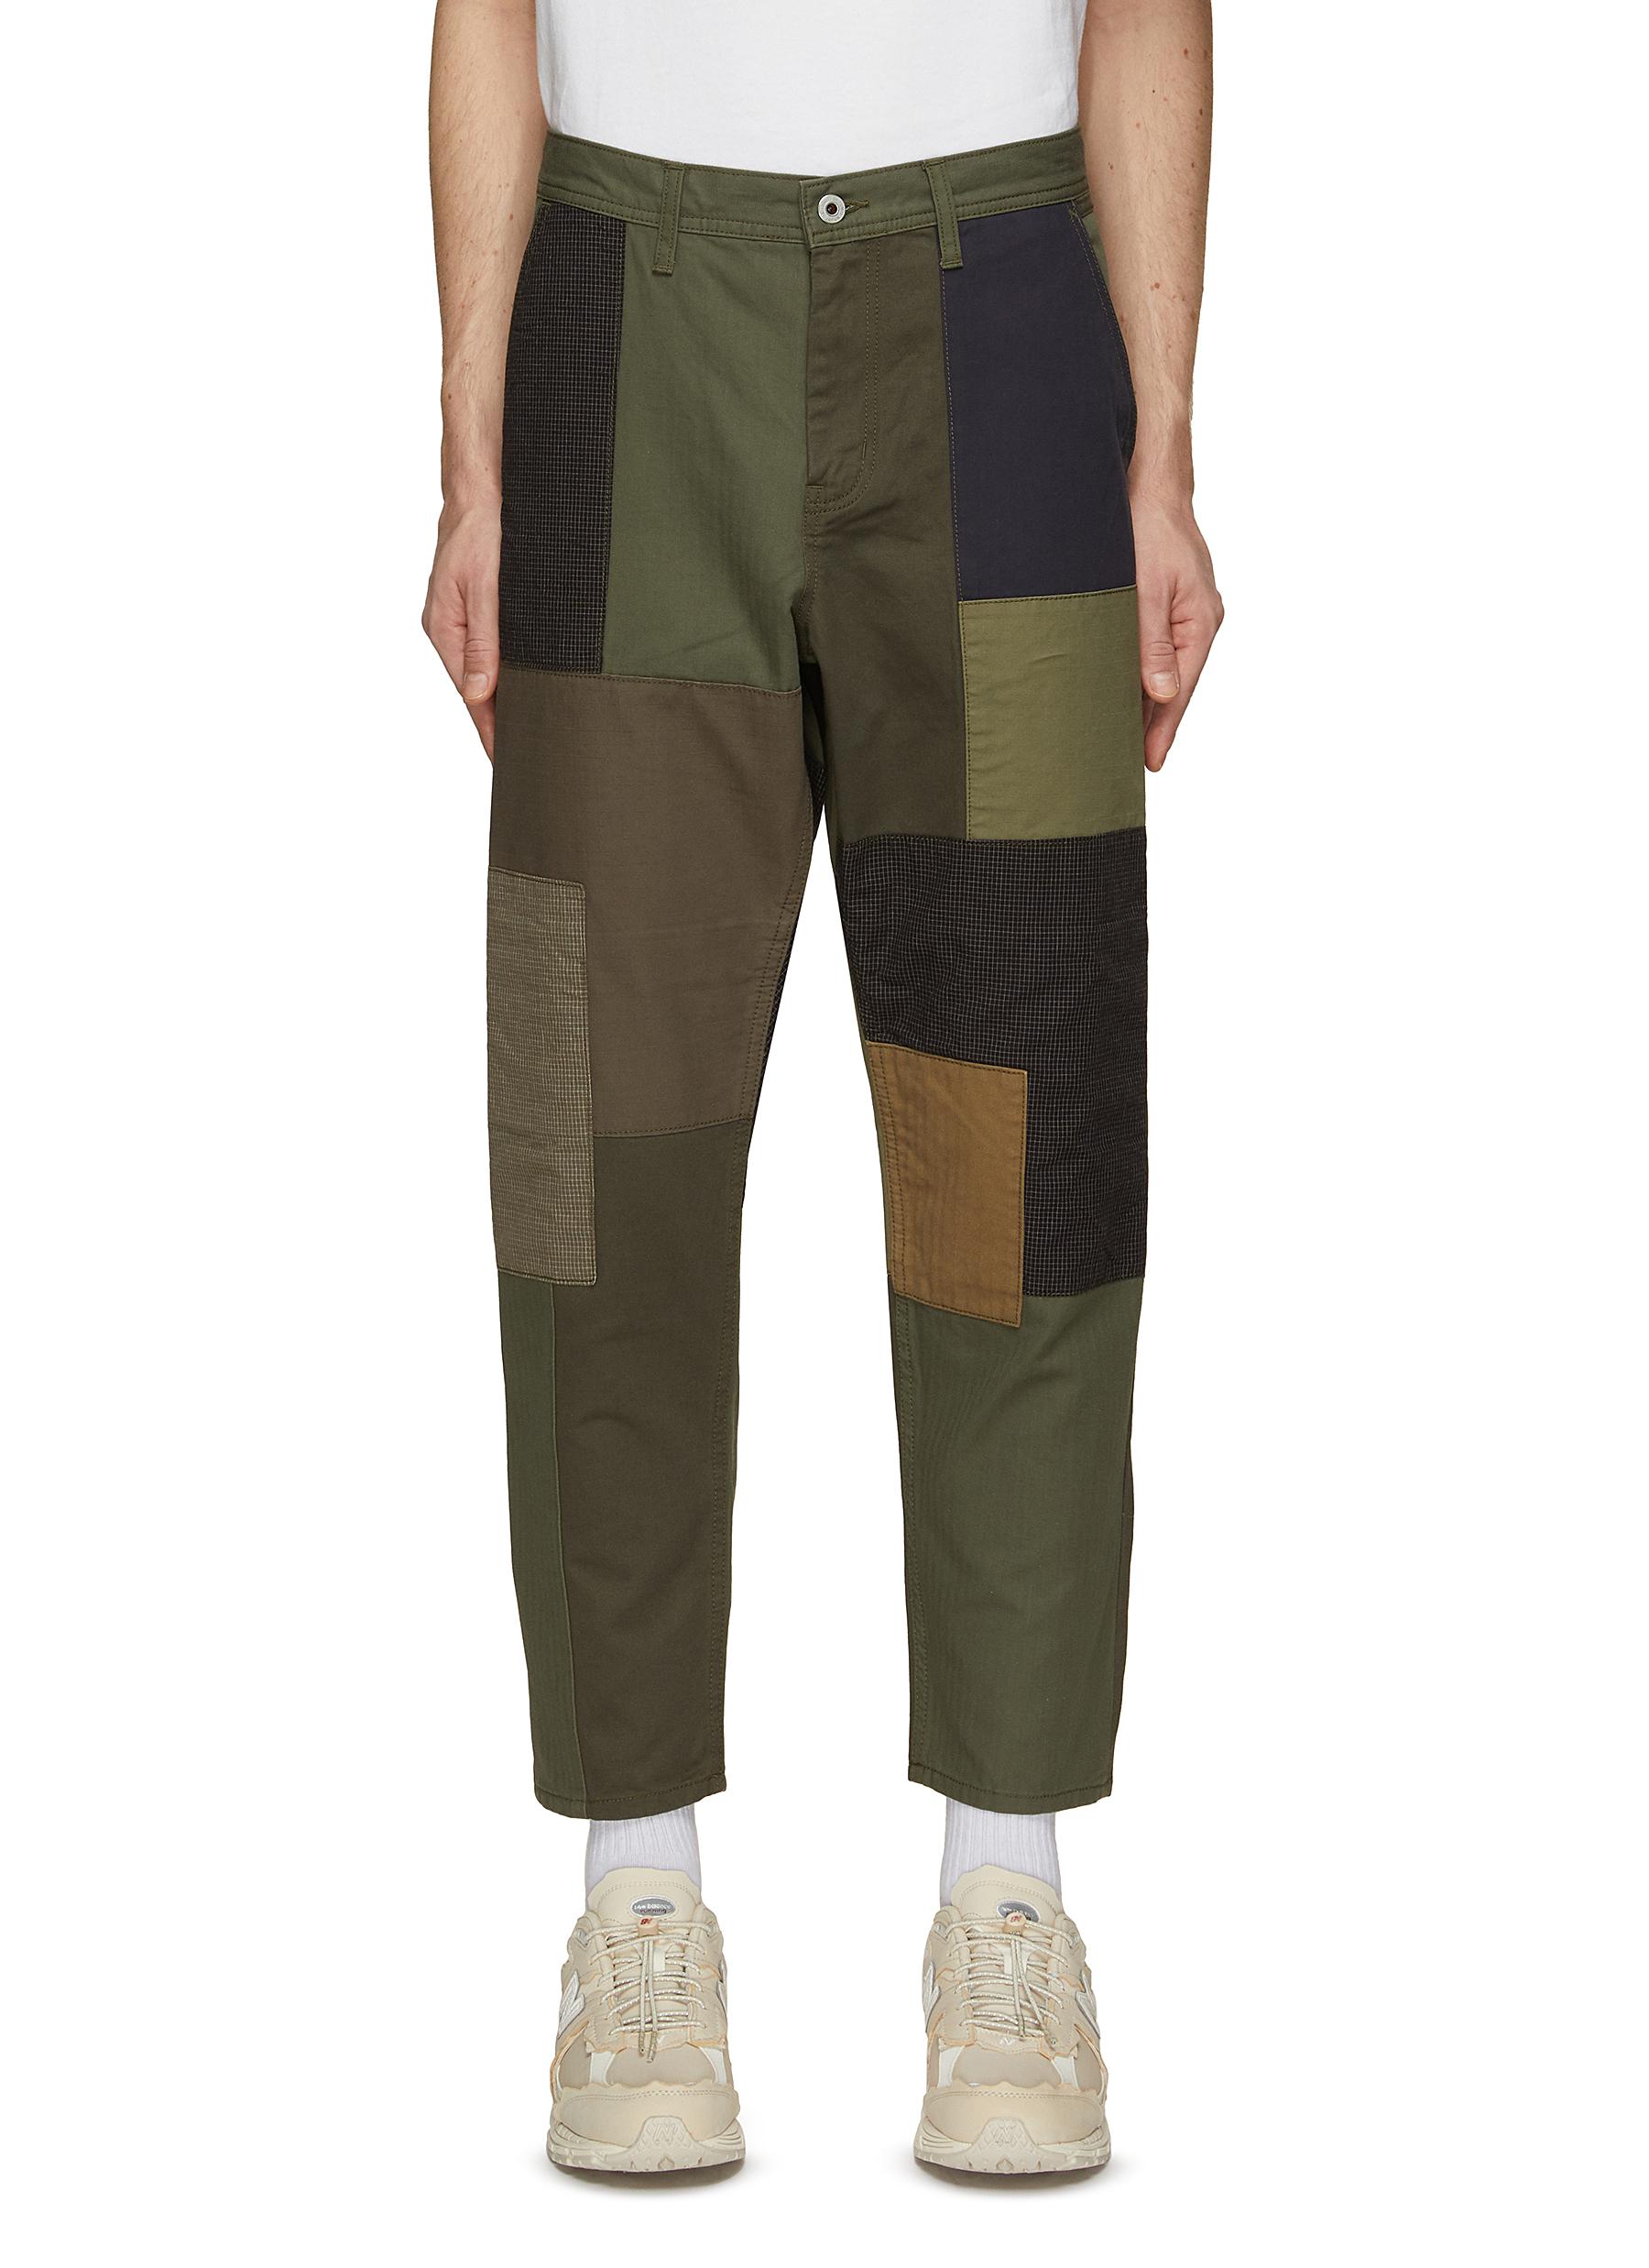 The Patchwork Pant